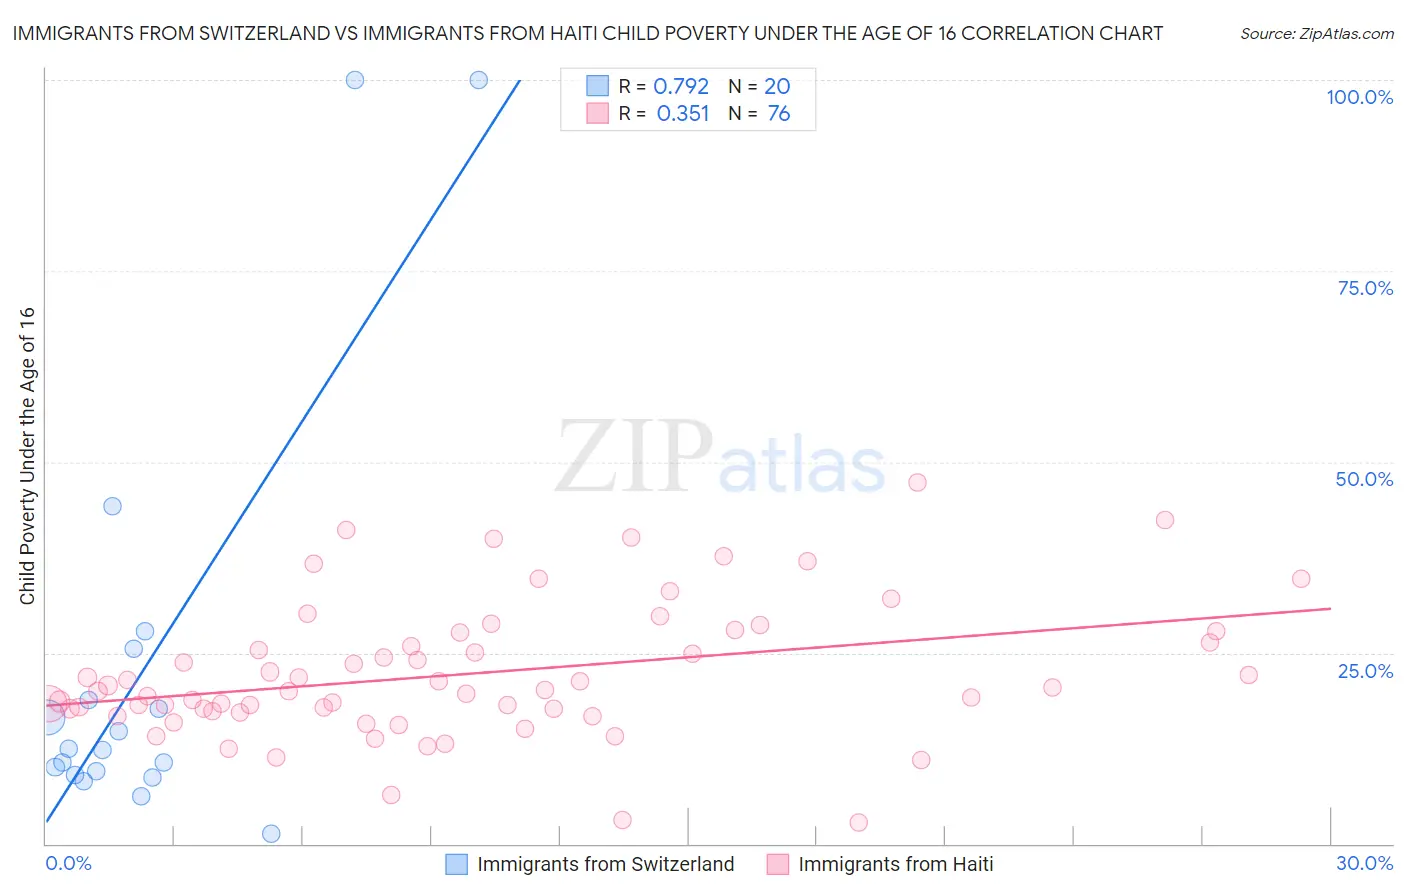 Immigrants from Switzerland vs Immigrants from Haiti Child Poverty Under the Age of 16